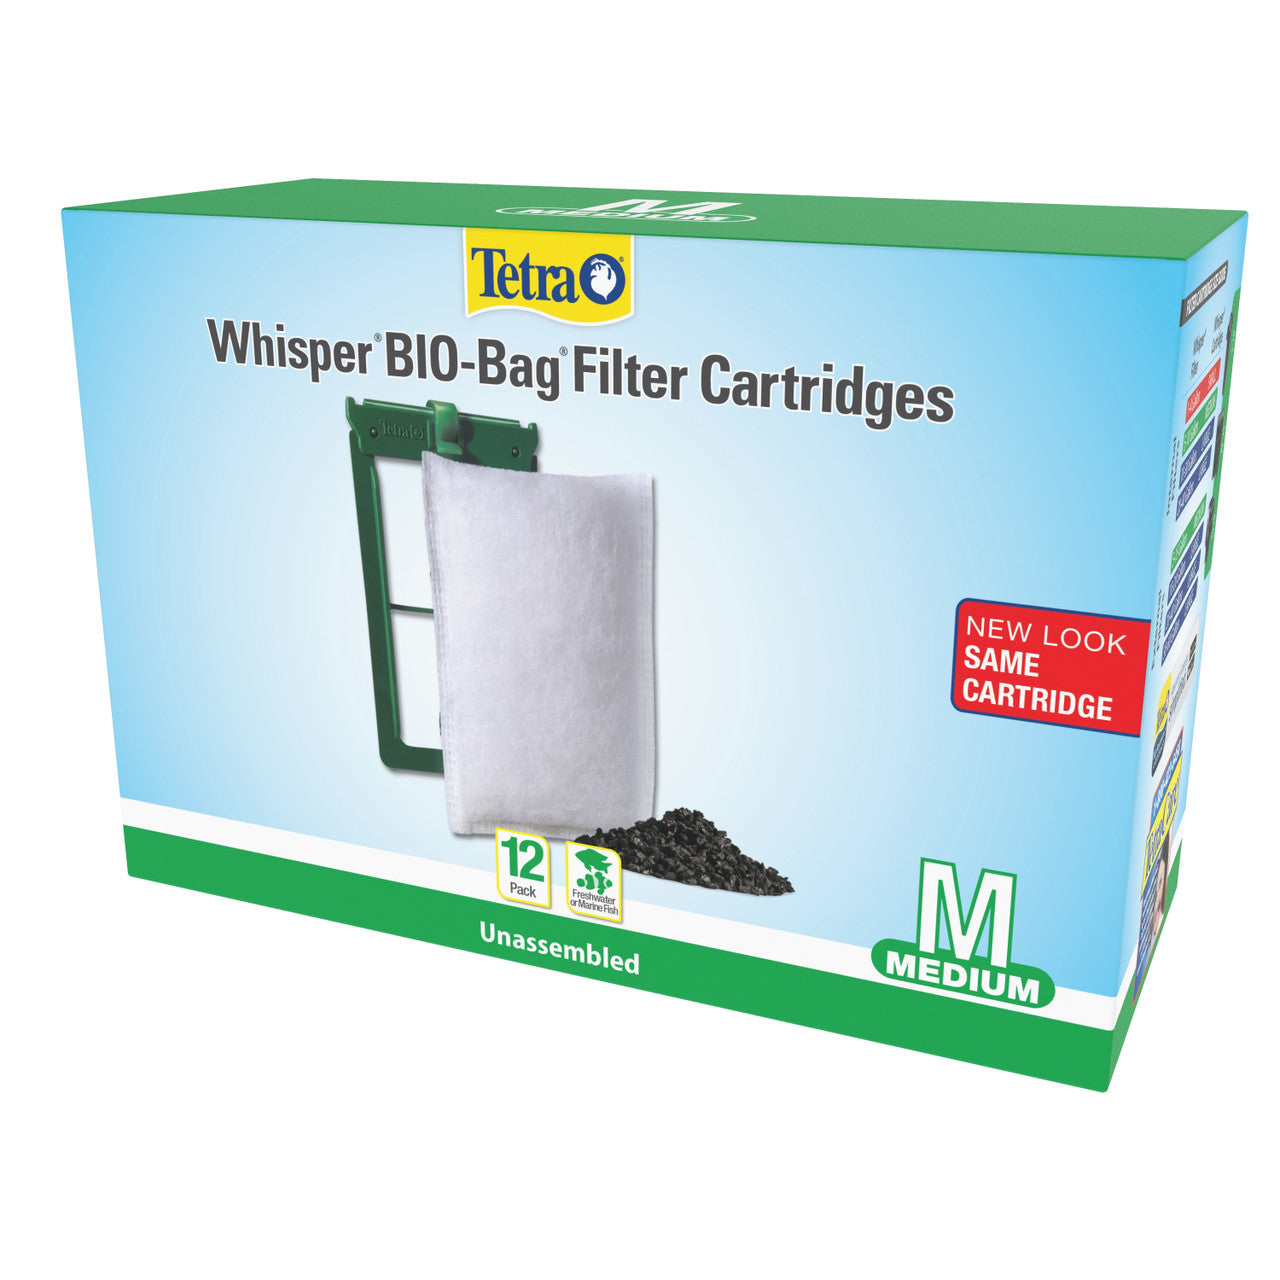 Tetra Whisper Bio-Bag Cartridge unassembled for TetraTec, Repto, and PF Filters 12pk MD